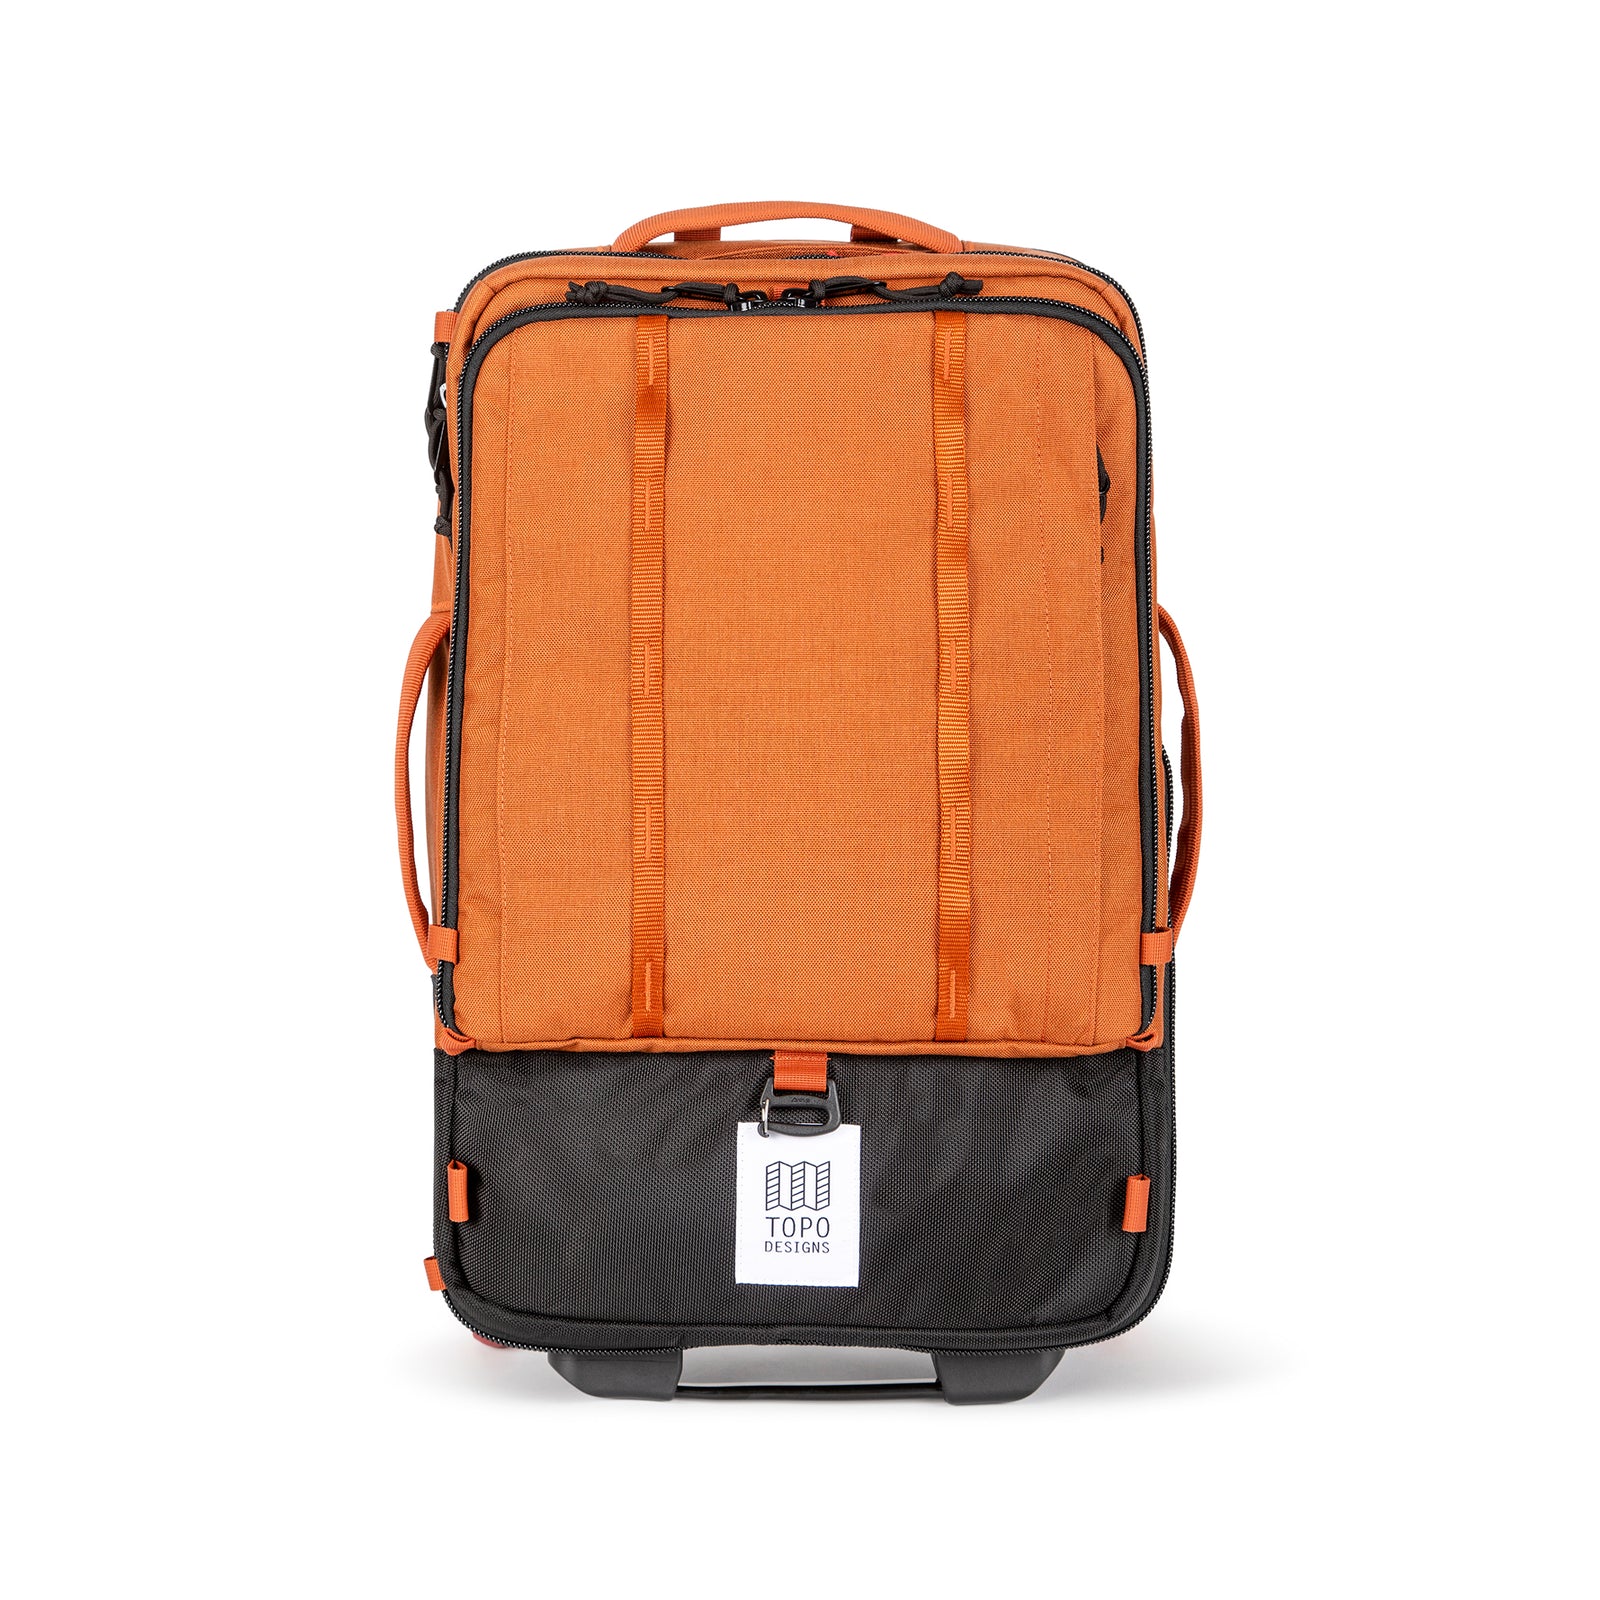 Topo Designs Global Travel Bag Roller durable carry-on convertible laptop backpack rolling suitcase in "Clay" orange.